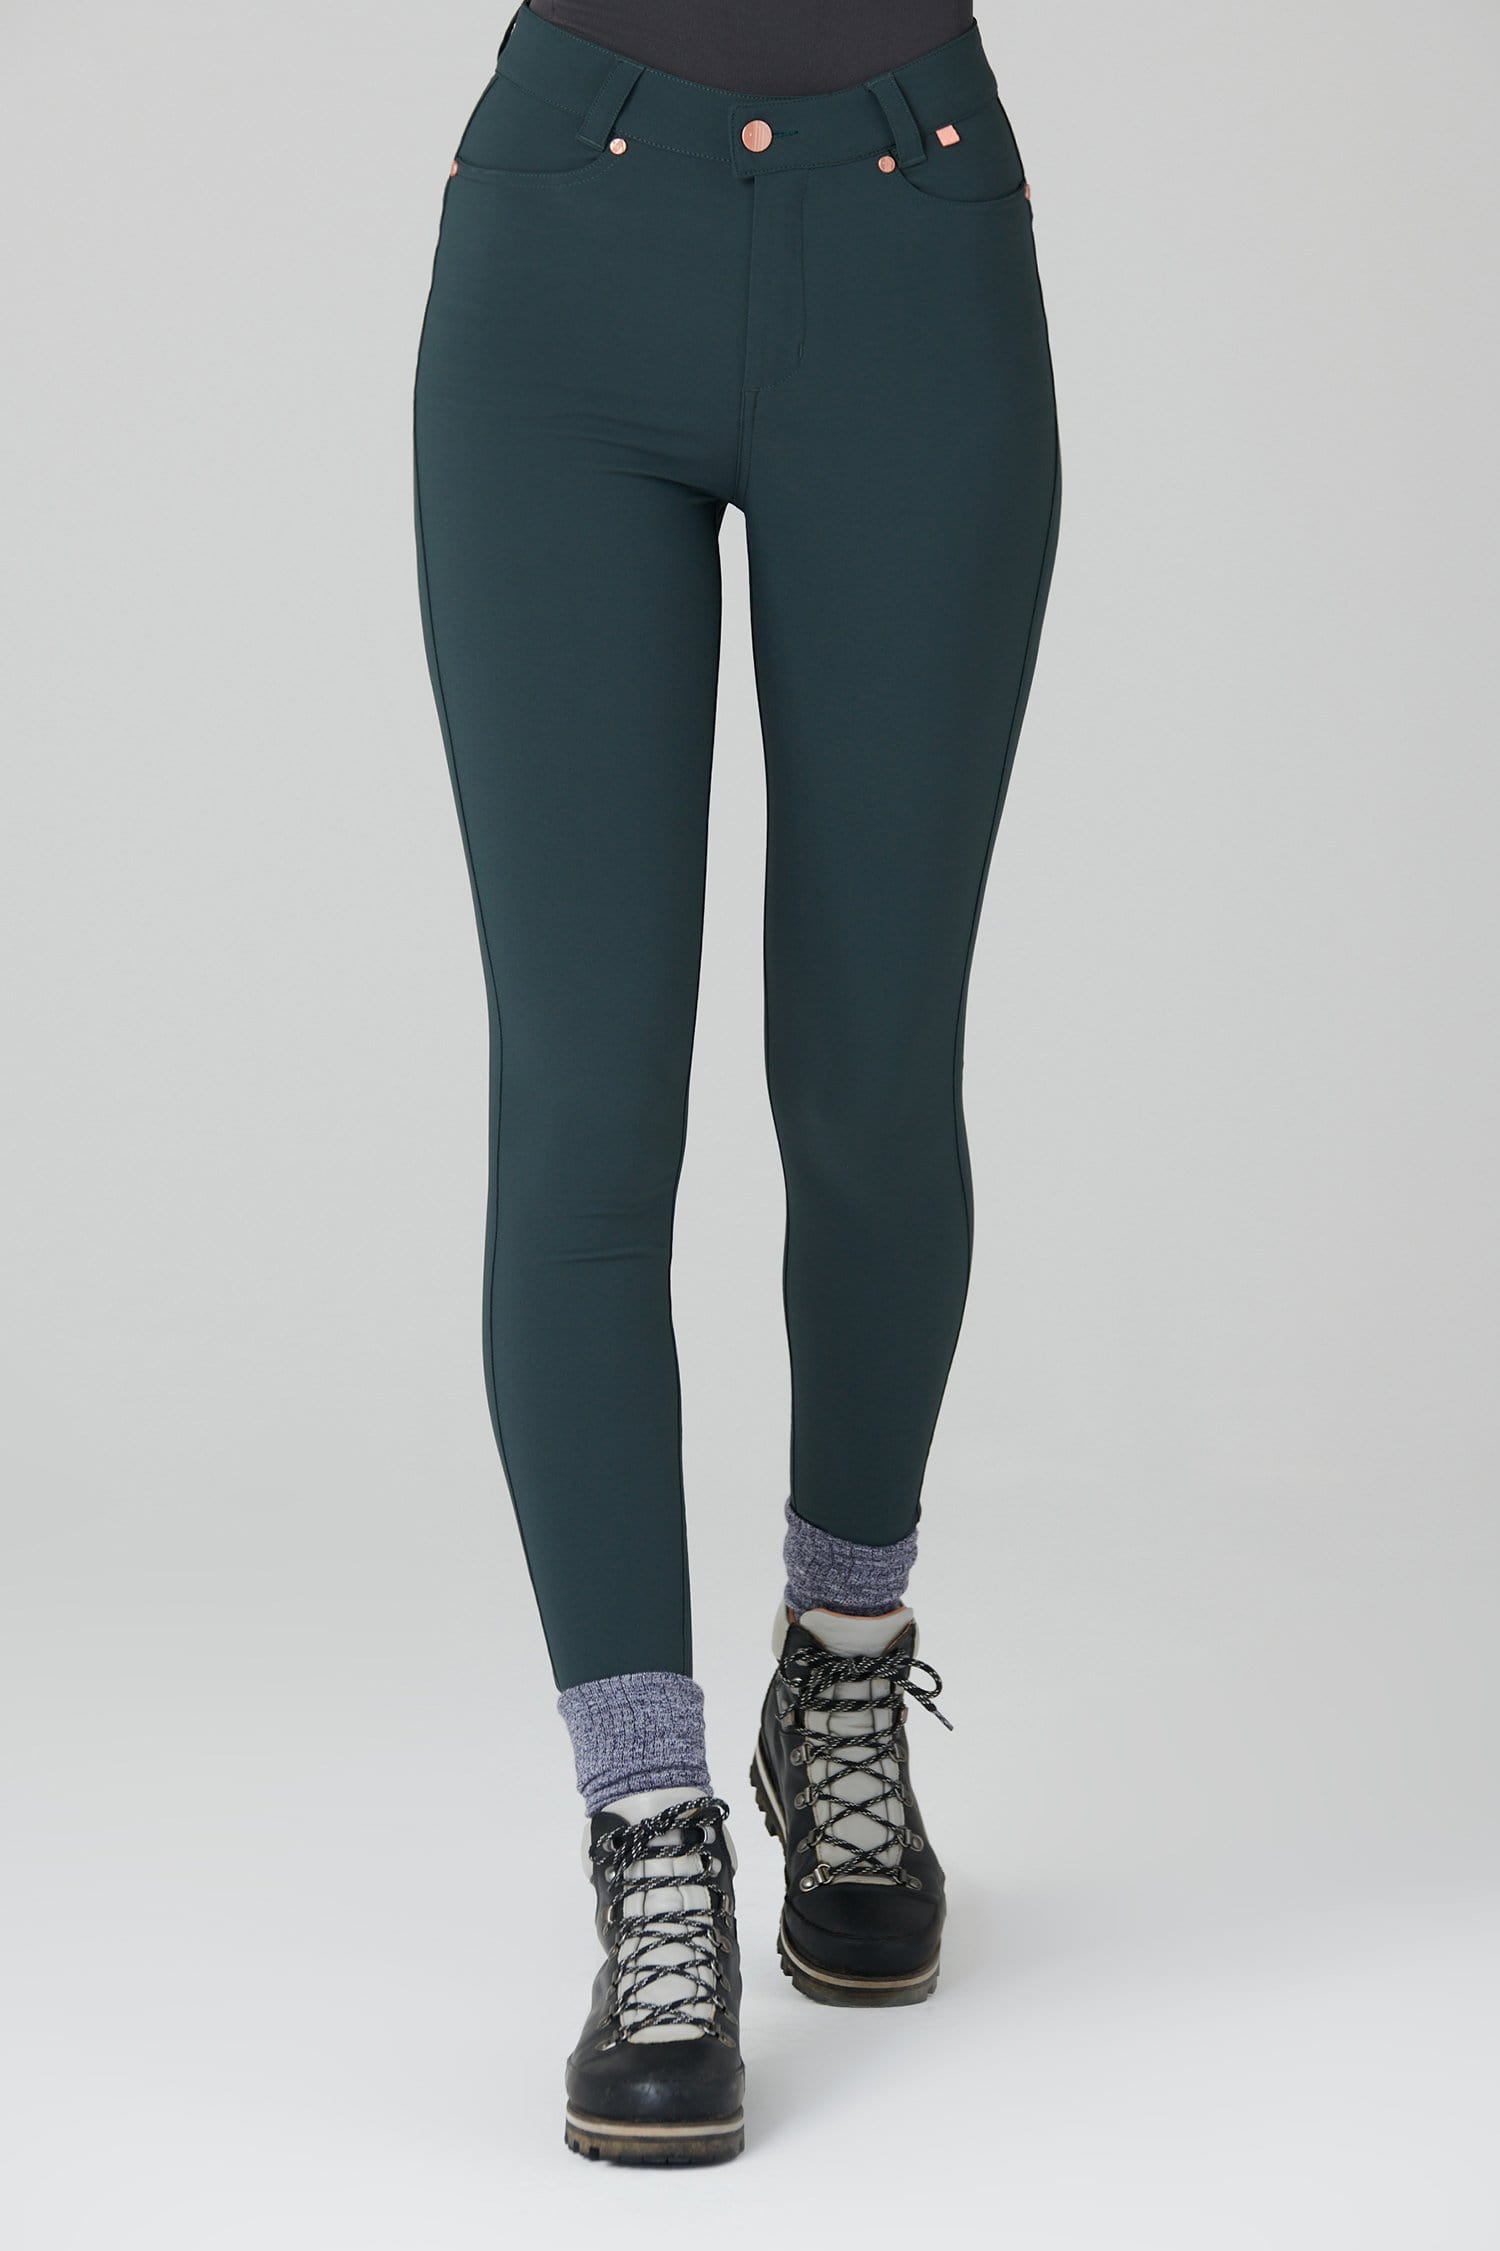 Thermal Skinny Outdoor Trousers - Forest Green - 24p / Uk6 - Womens - Acai Outdoorwear